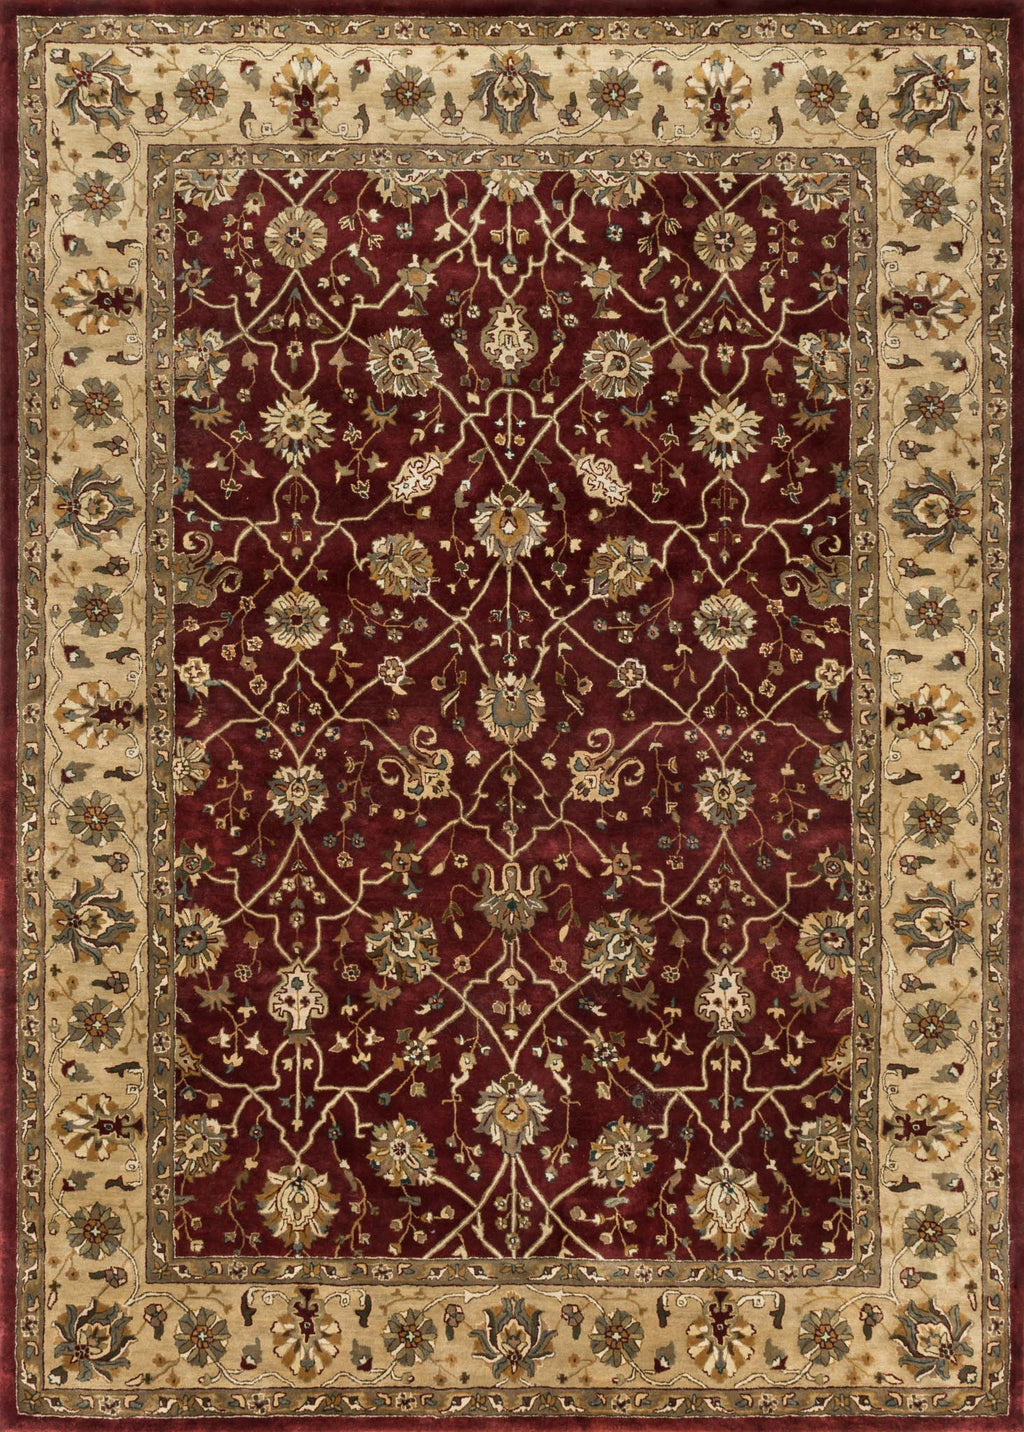 Loloi Yorkshire YK-04 Red / Light Gold Area Rug main image